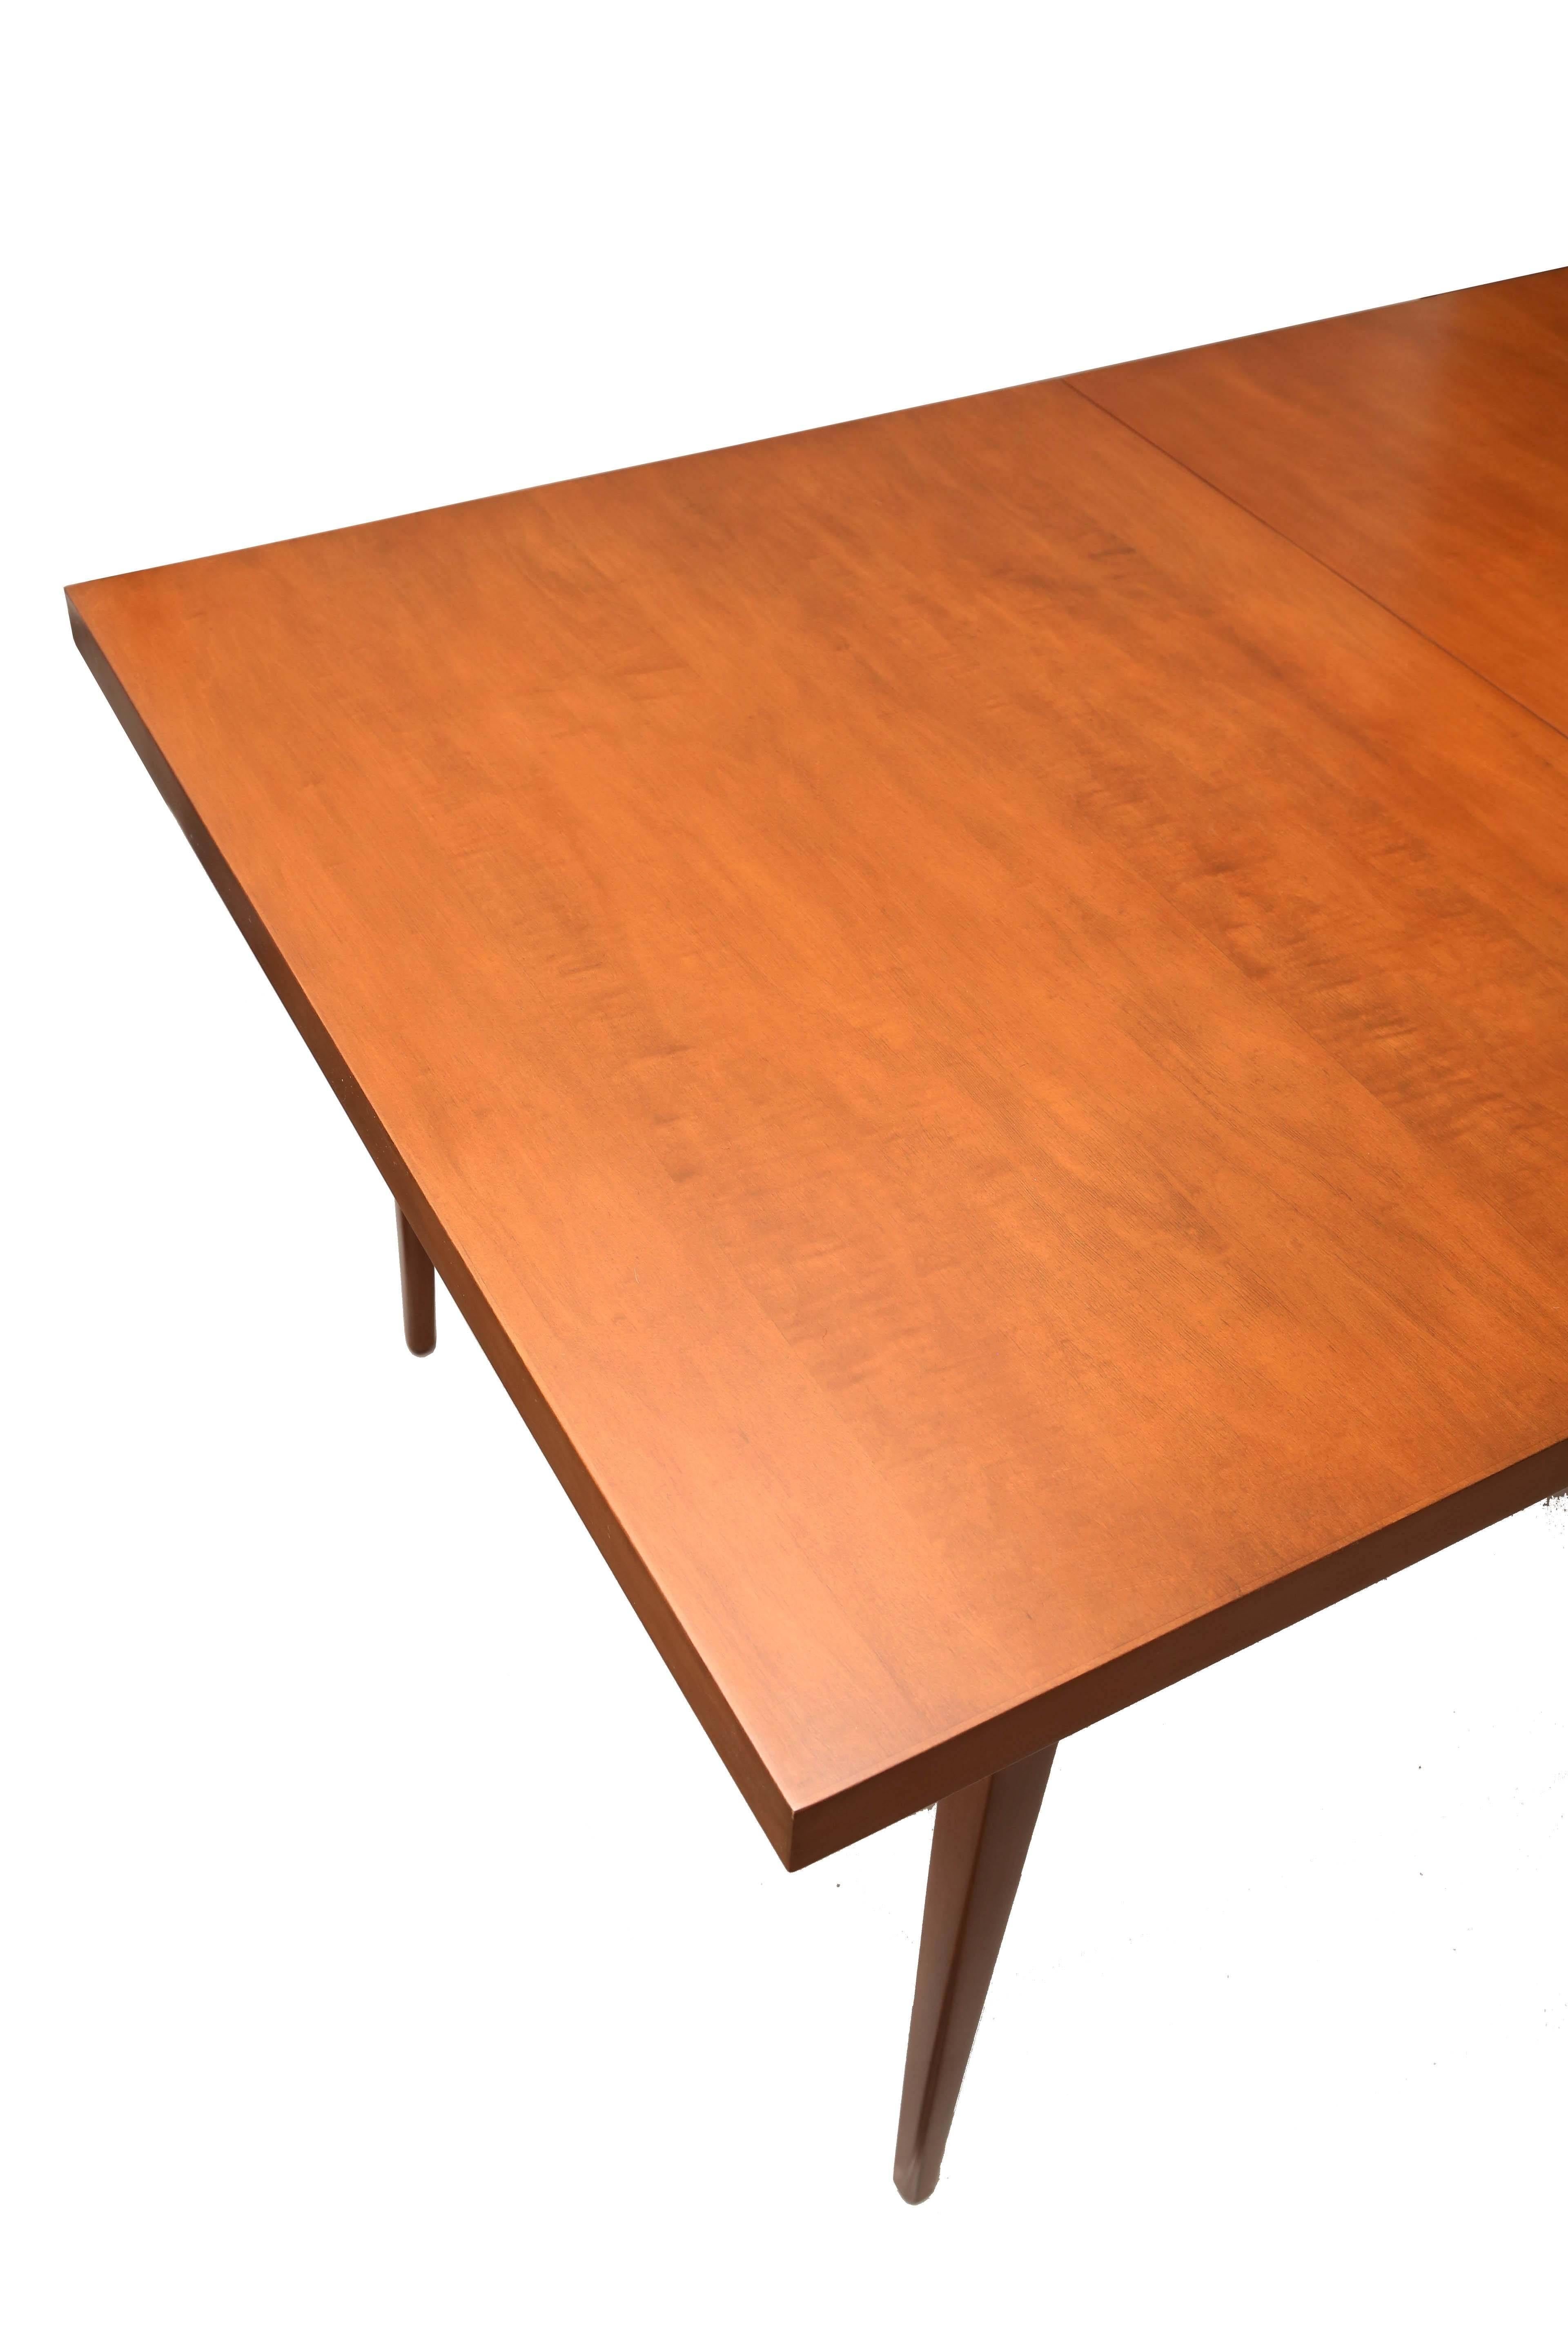 Paul McCobb Dining Table with Two Leaves, USA, 1960s For Sale 1